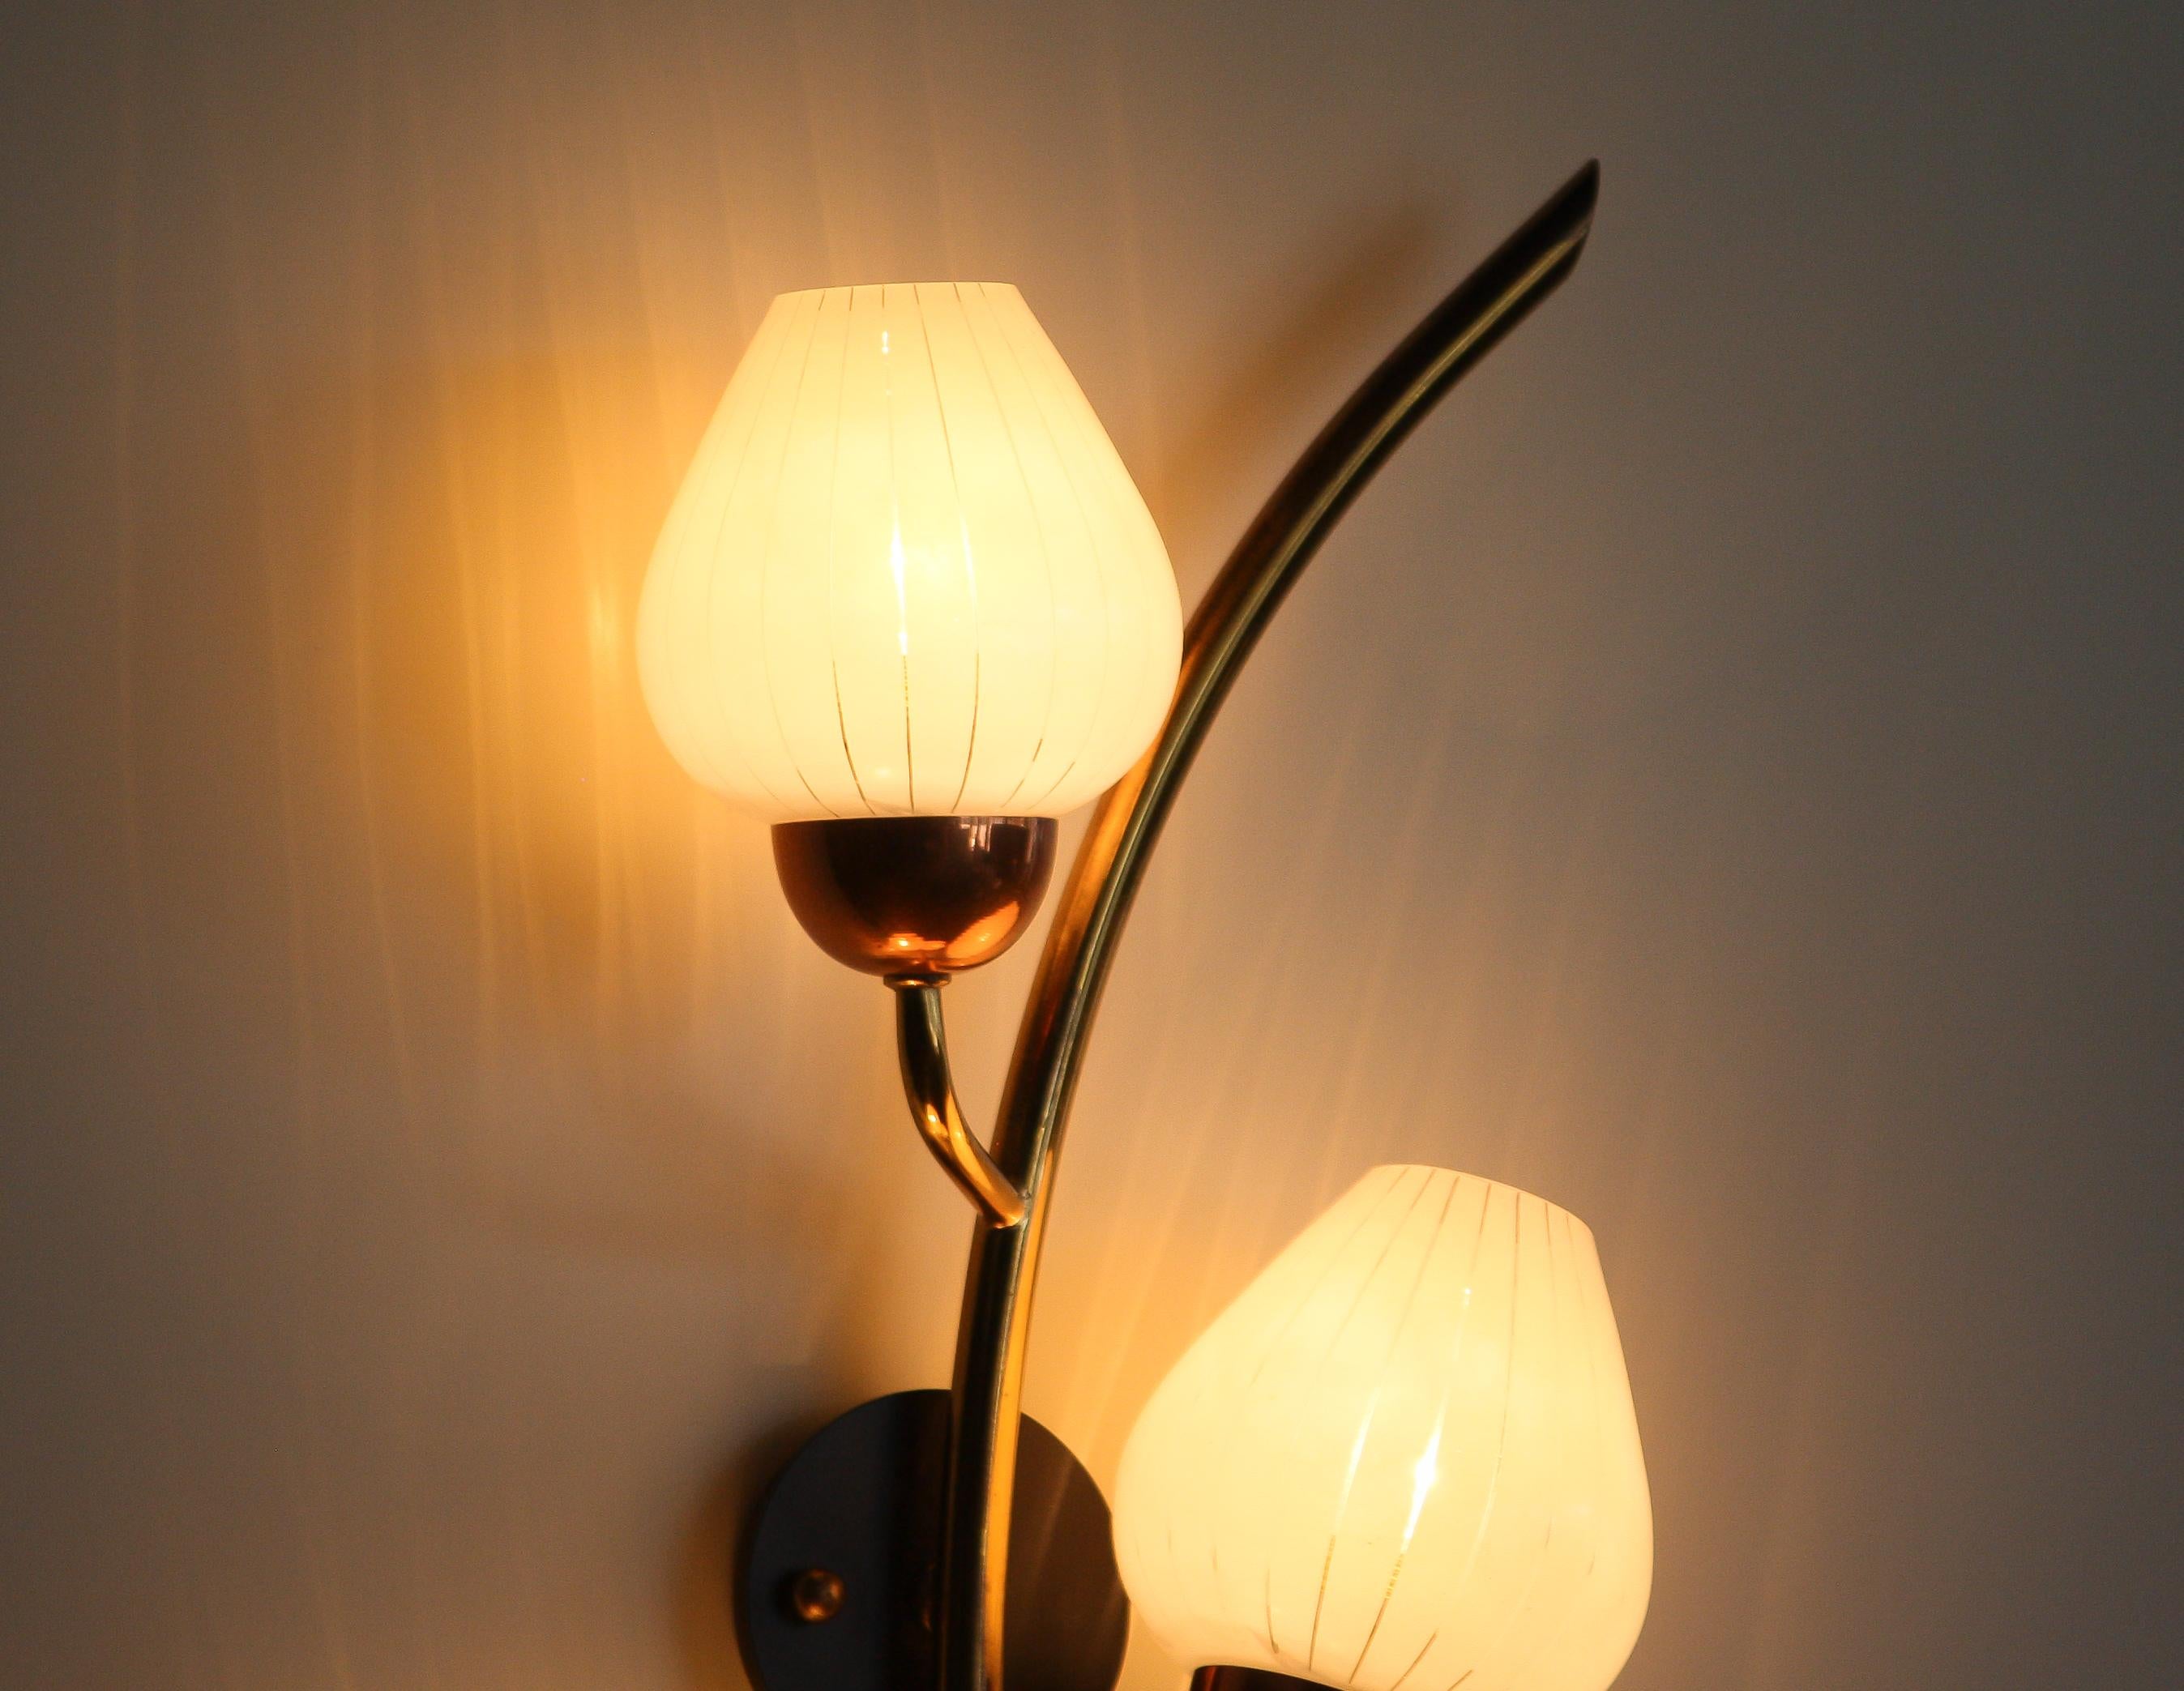 1960s Brass and Glass Wall Light Scone In Good Condition In Silvolde, Gelderland